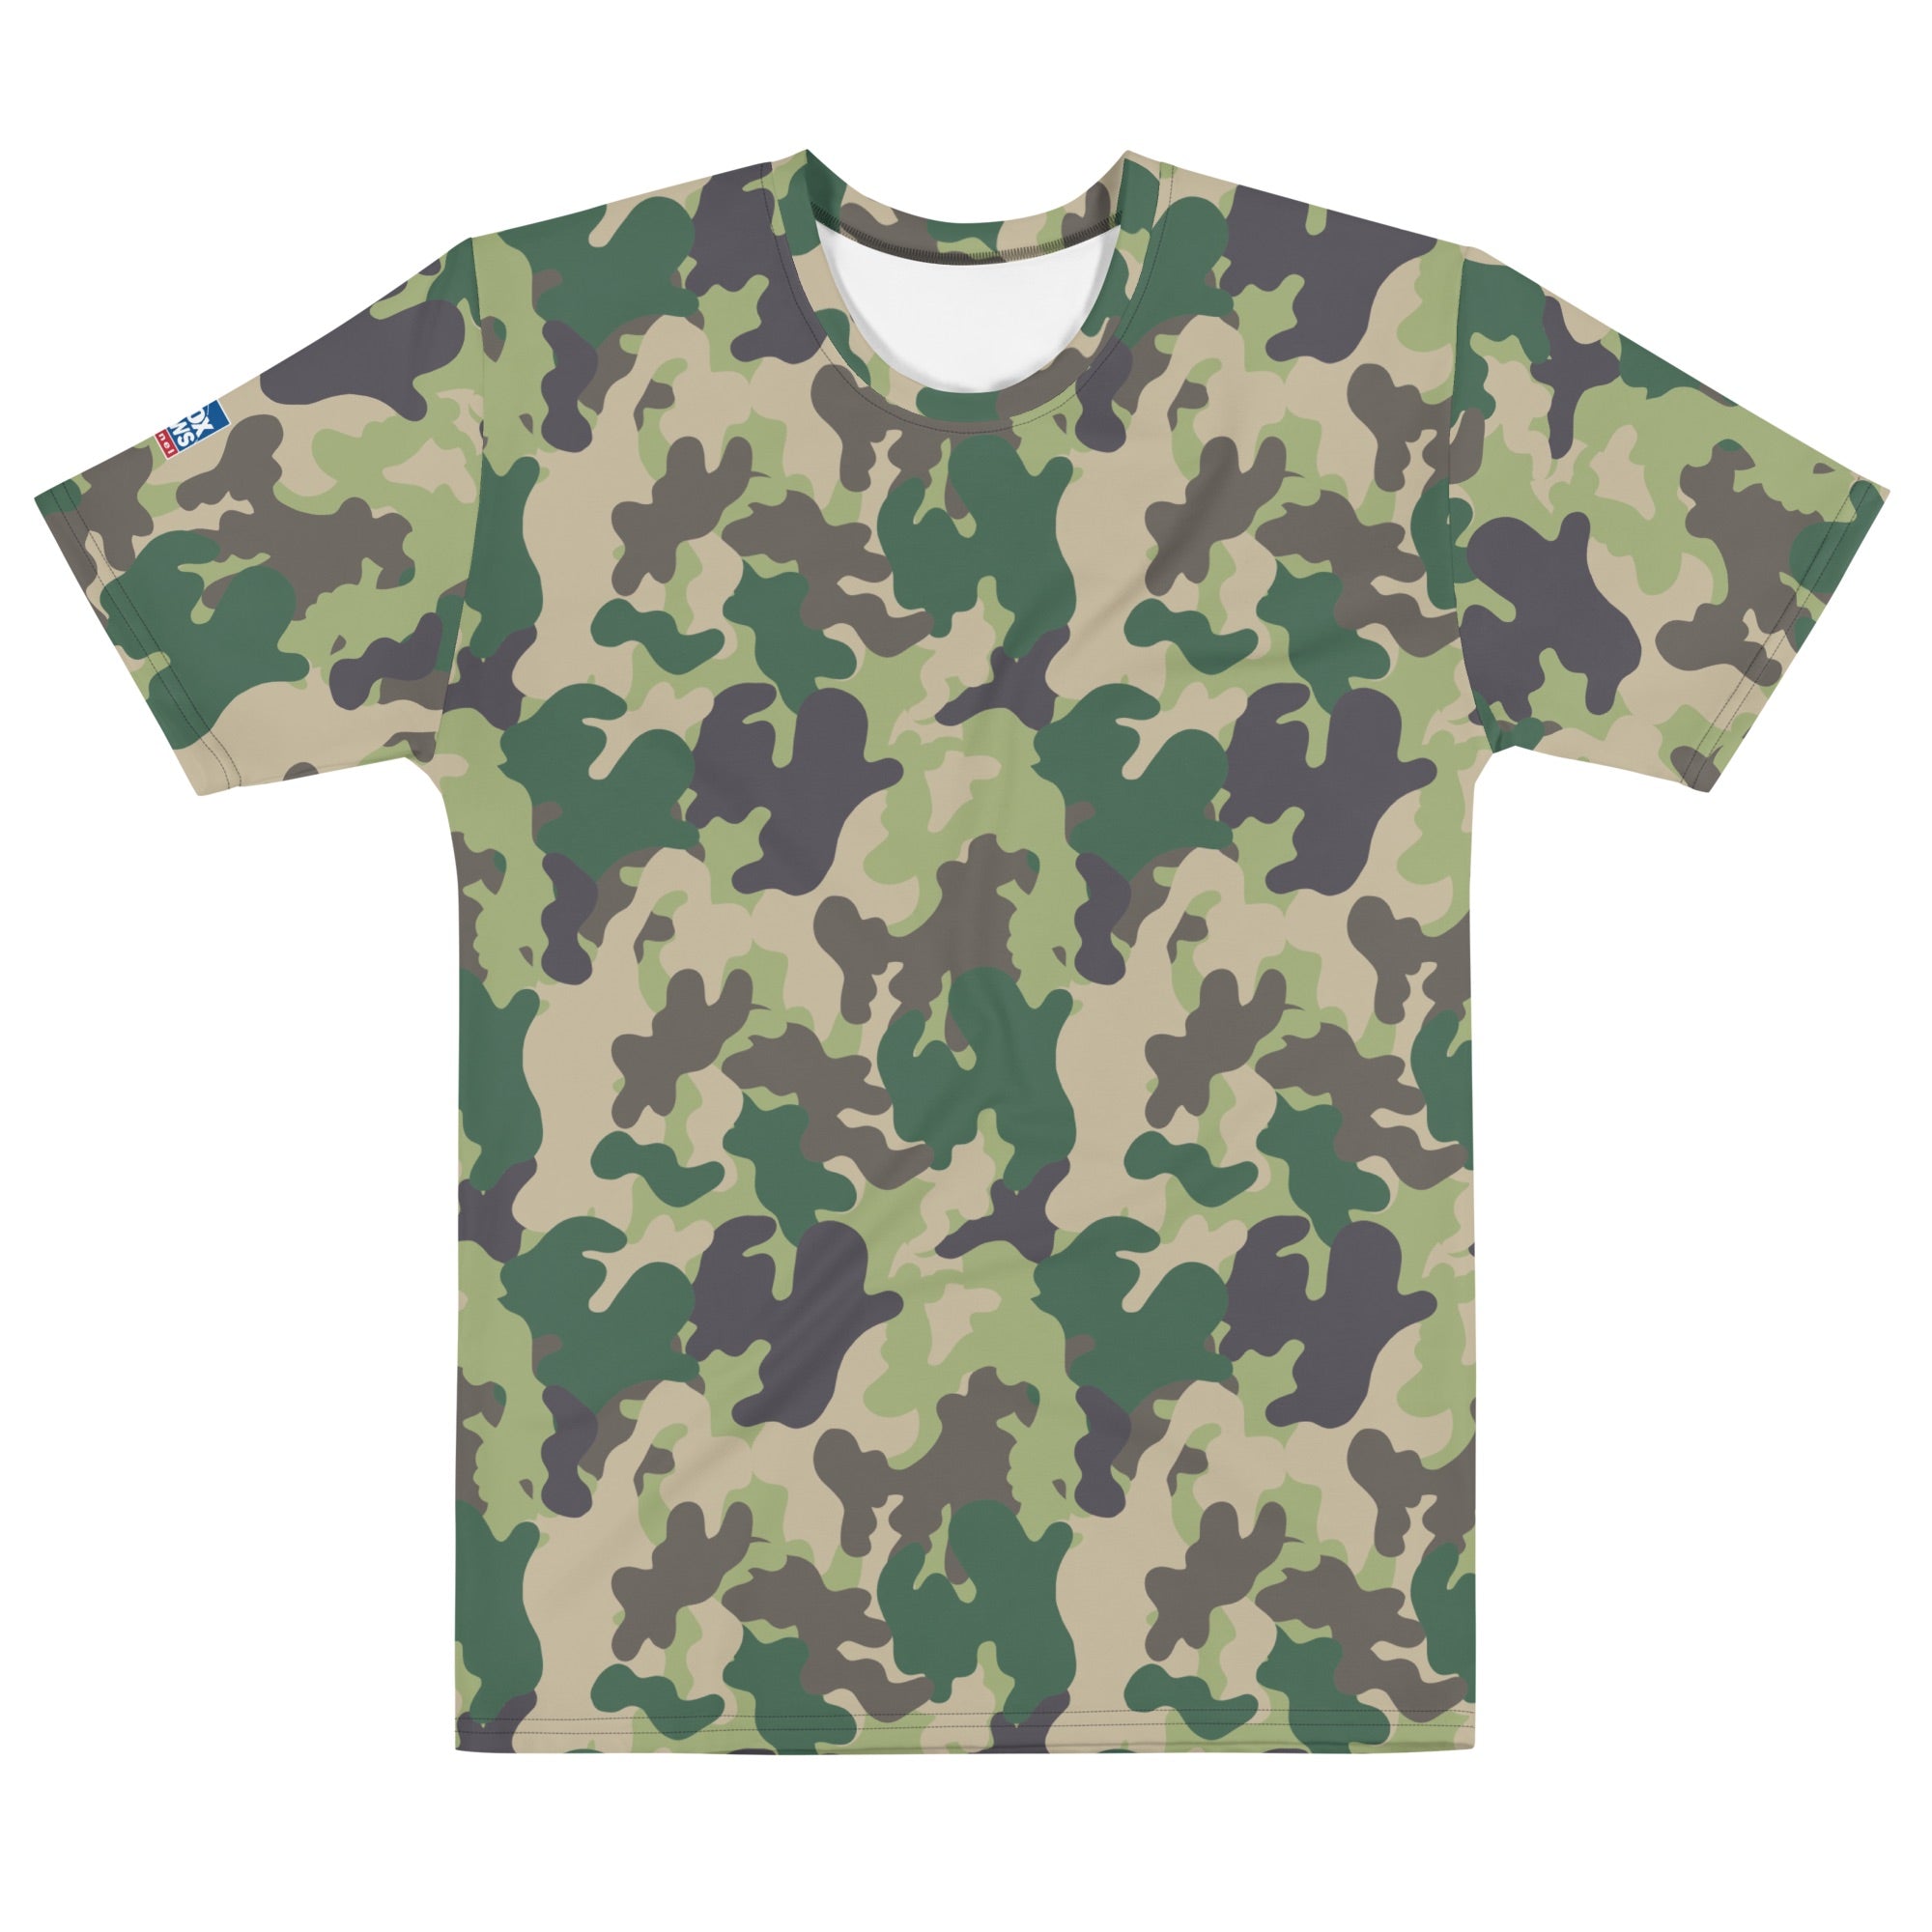 army camouflage t shirt